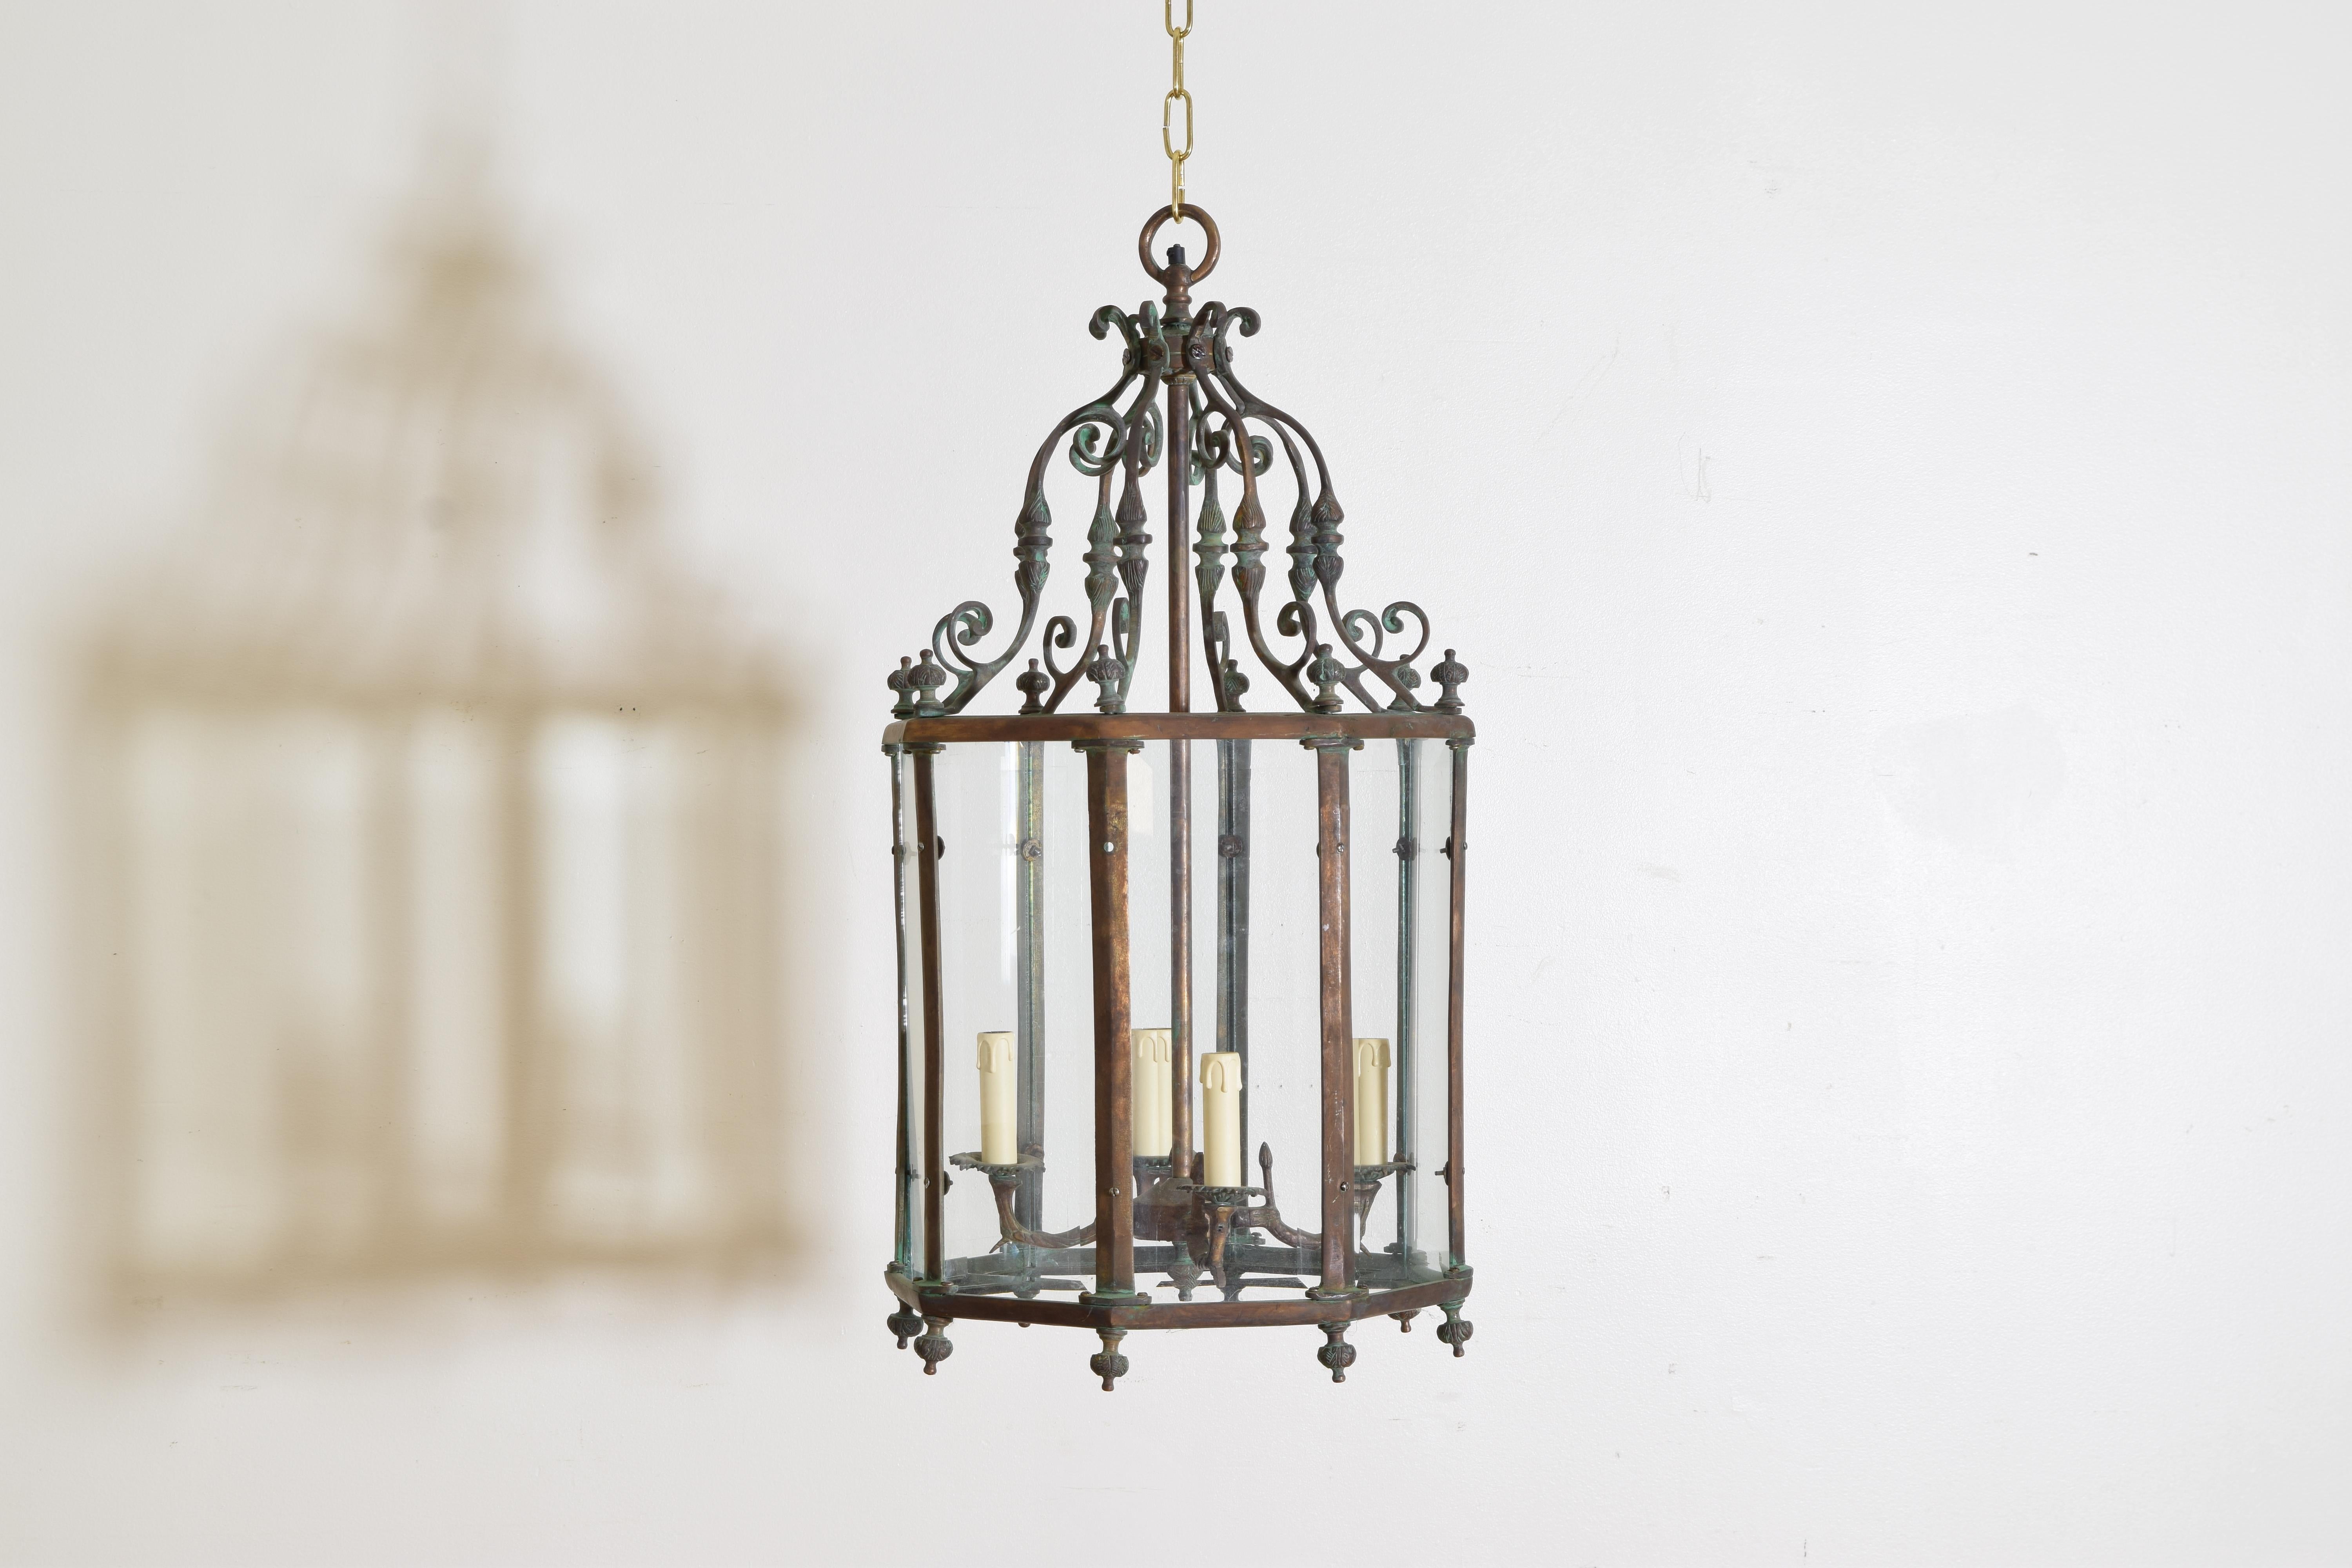 Baroque Belgian Rococo Style Brass & Copper Octagonal Lantern, 19th/20th century For Sale